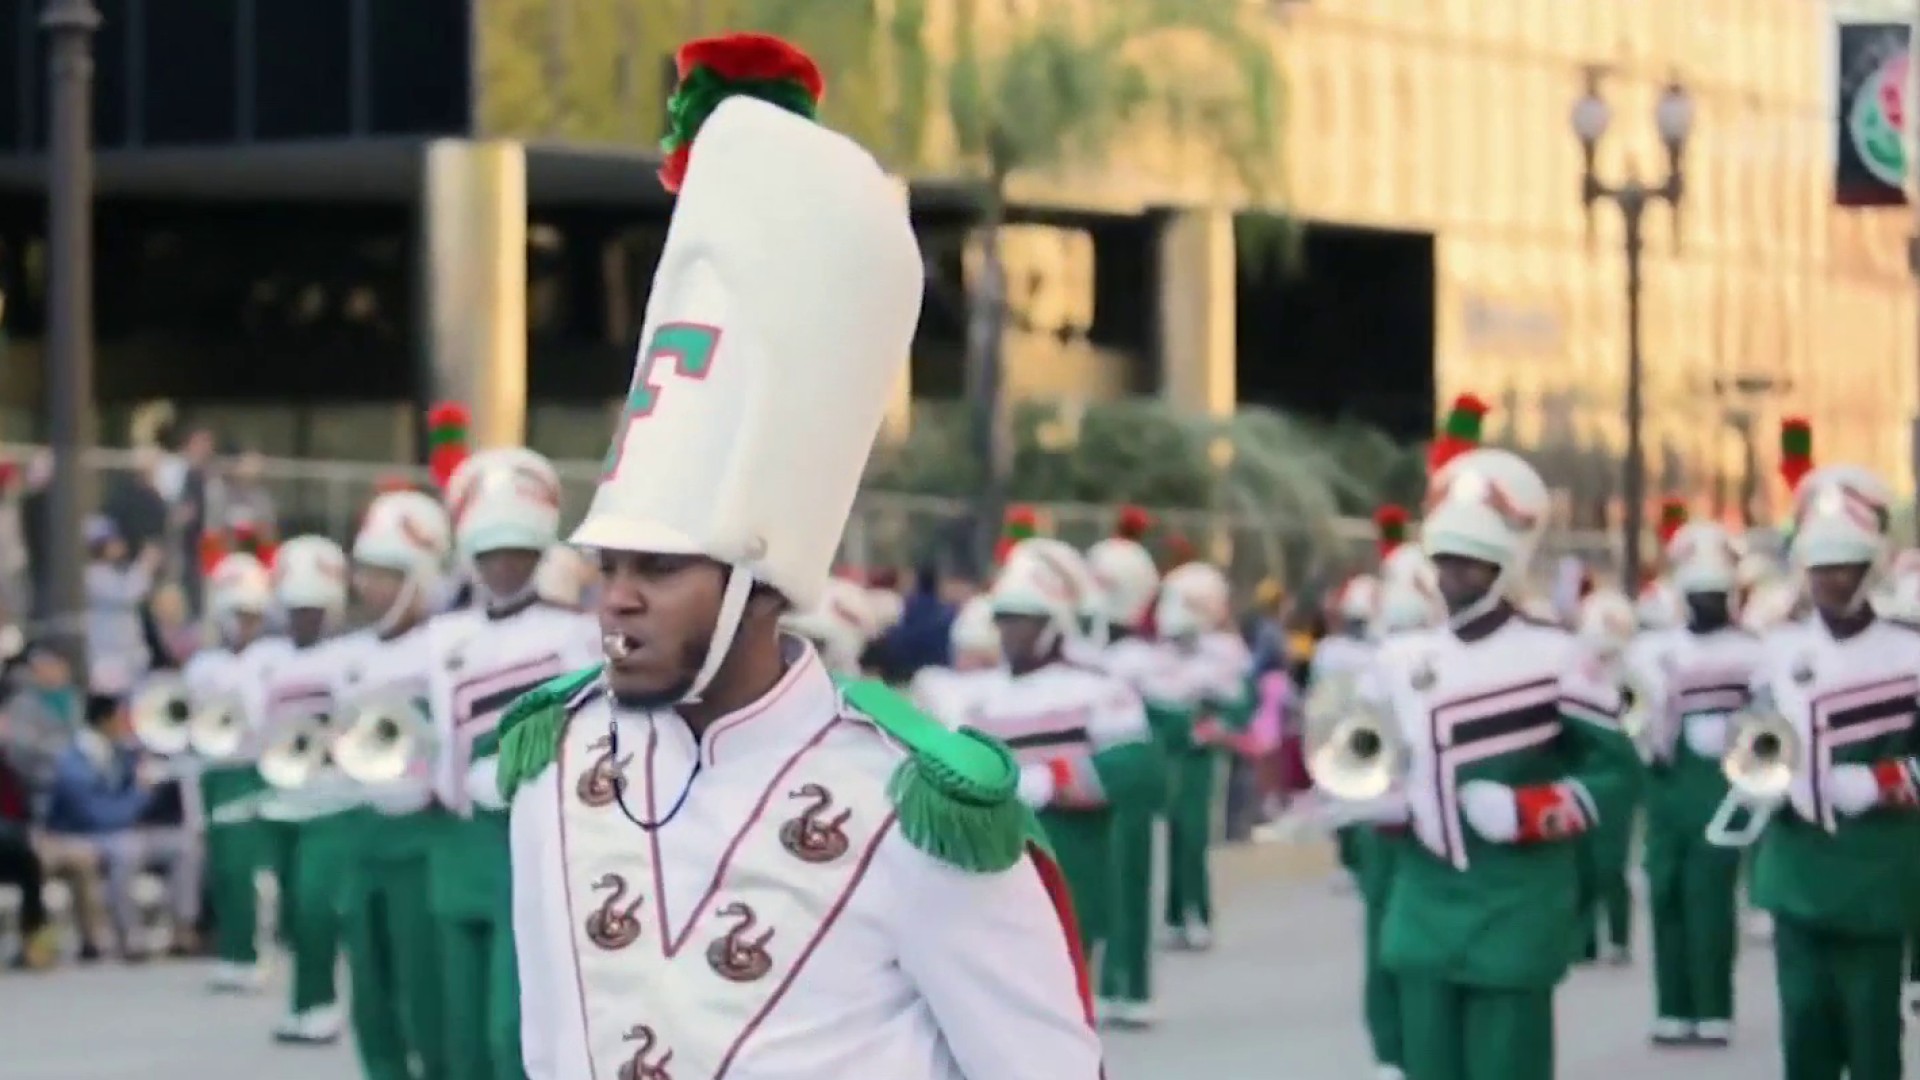 Bands of America - Congratulations to the incredible FAMU Marching